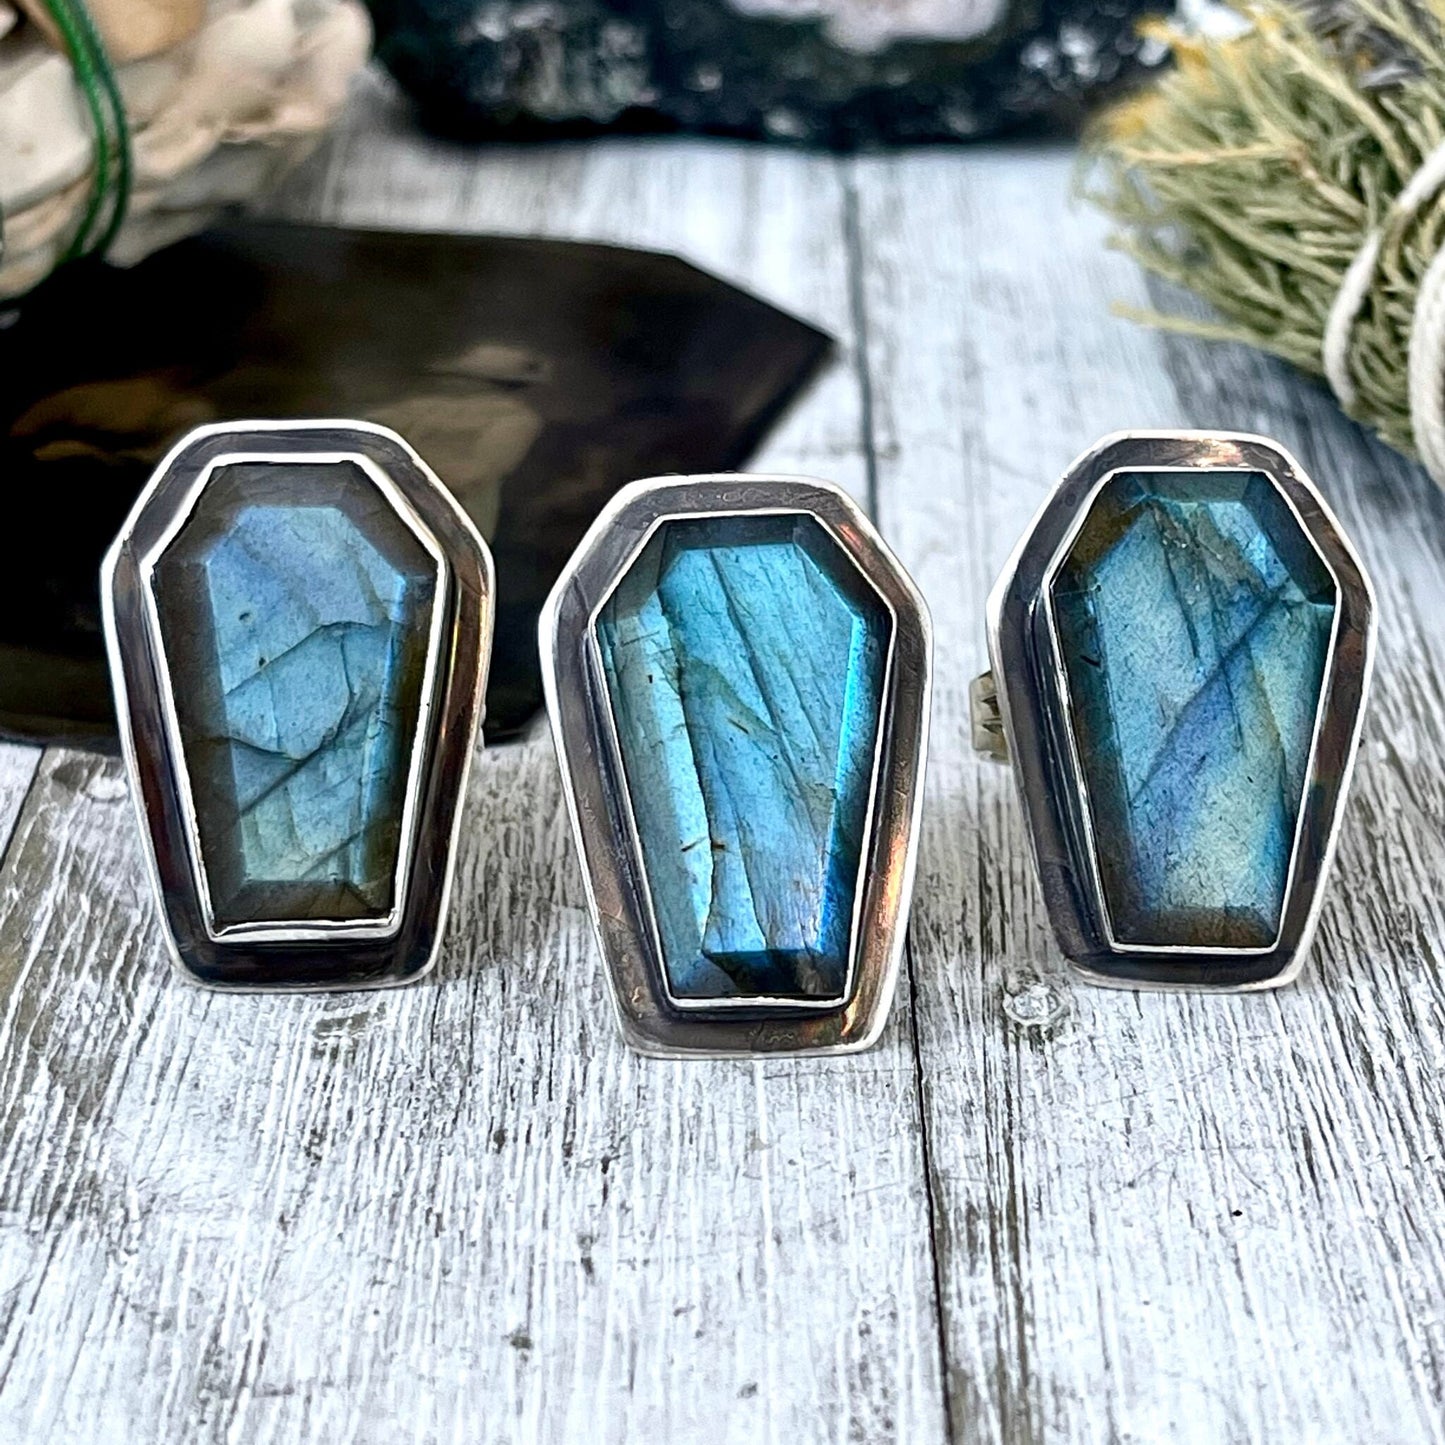 Coffin Jewelry, Coffin Ring, Crescent Moon, Crystal Ring, Etsy Id 1102370293, Foxlark Alchemy, FOXLARK- RINGS, Goth Jewelry, Gypsy Ring, Halloween Jewelry, Halloween Ring, Jewelry, Labradorite Ring, Rings, Statement Rings, Wholesale, Witch Jewelry